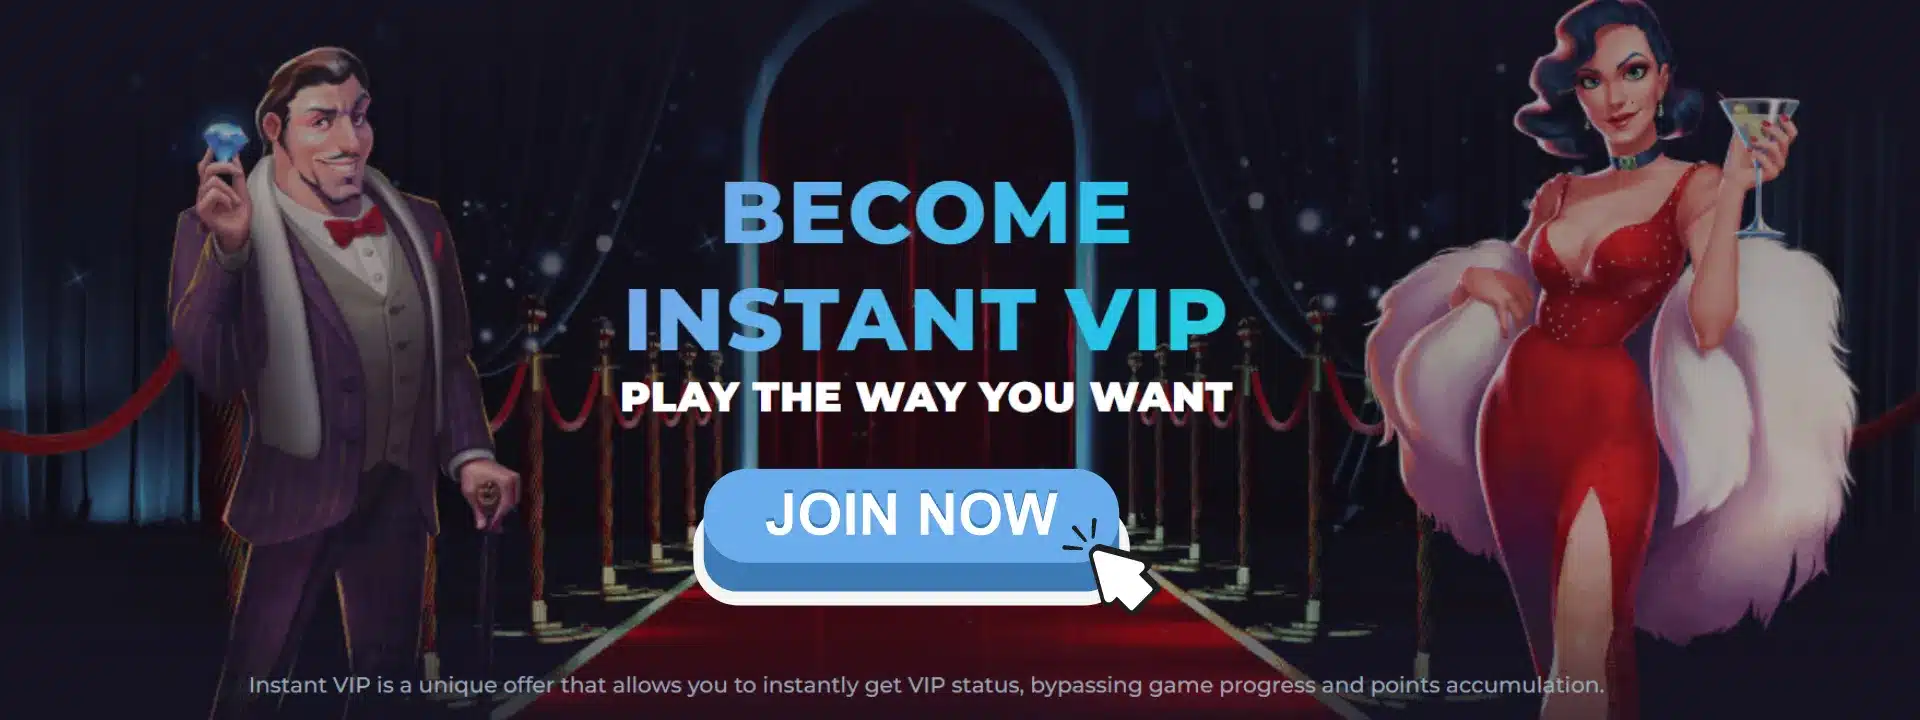 Become Instant VIP